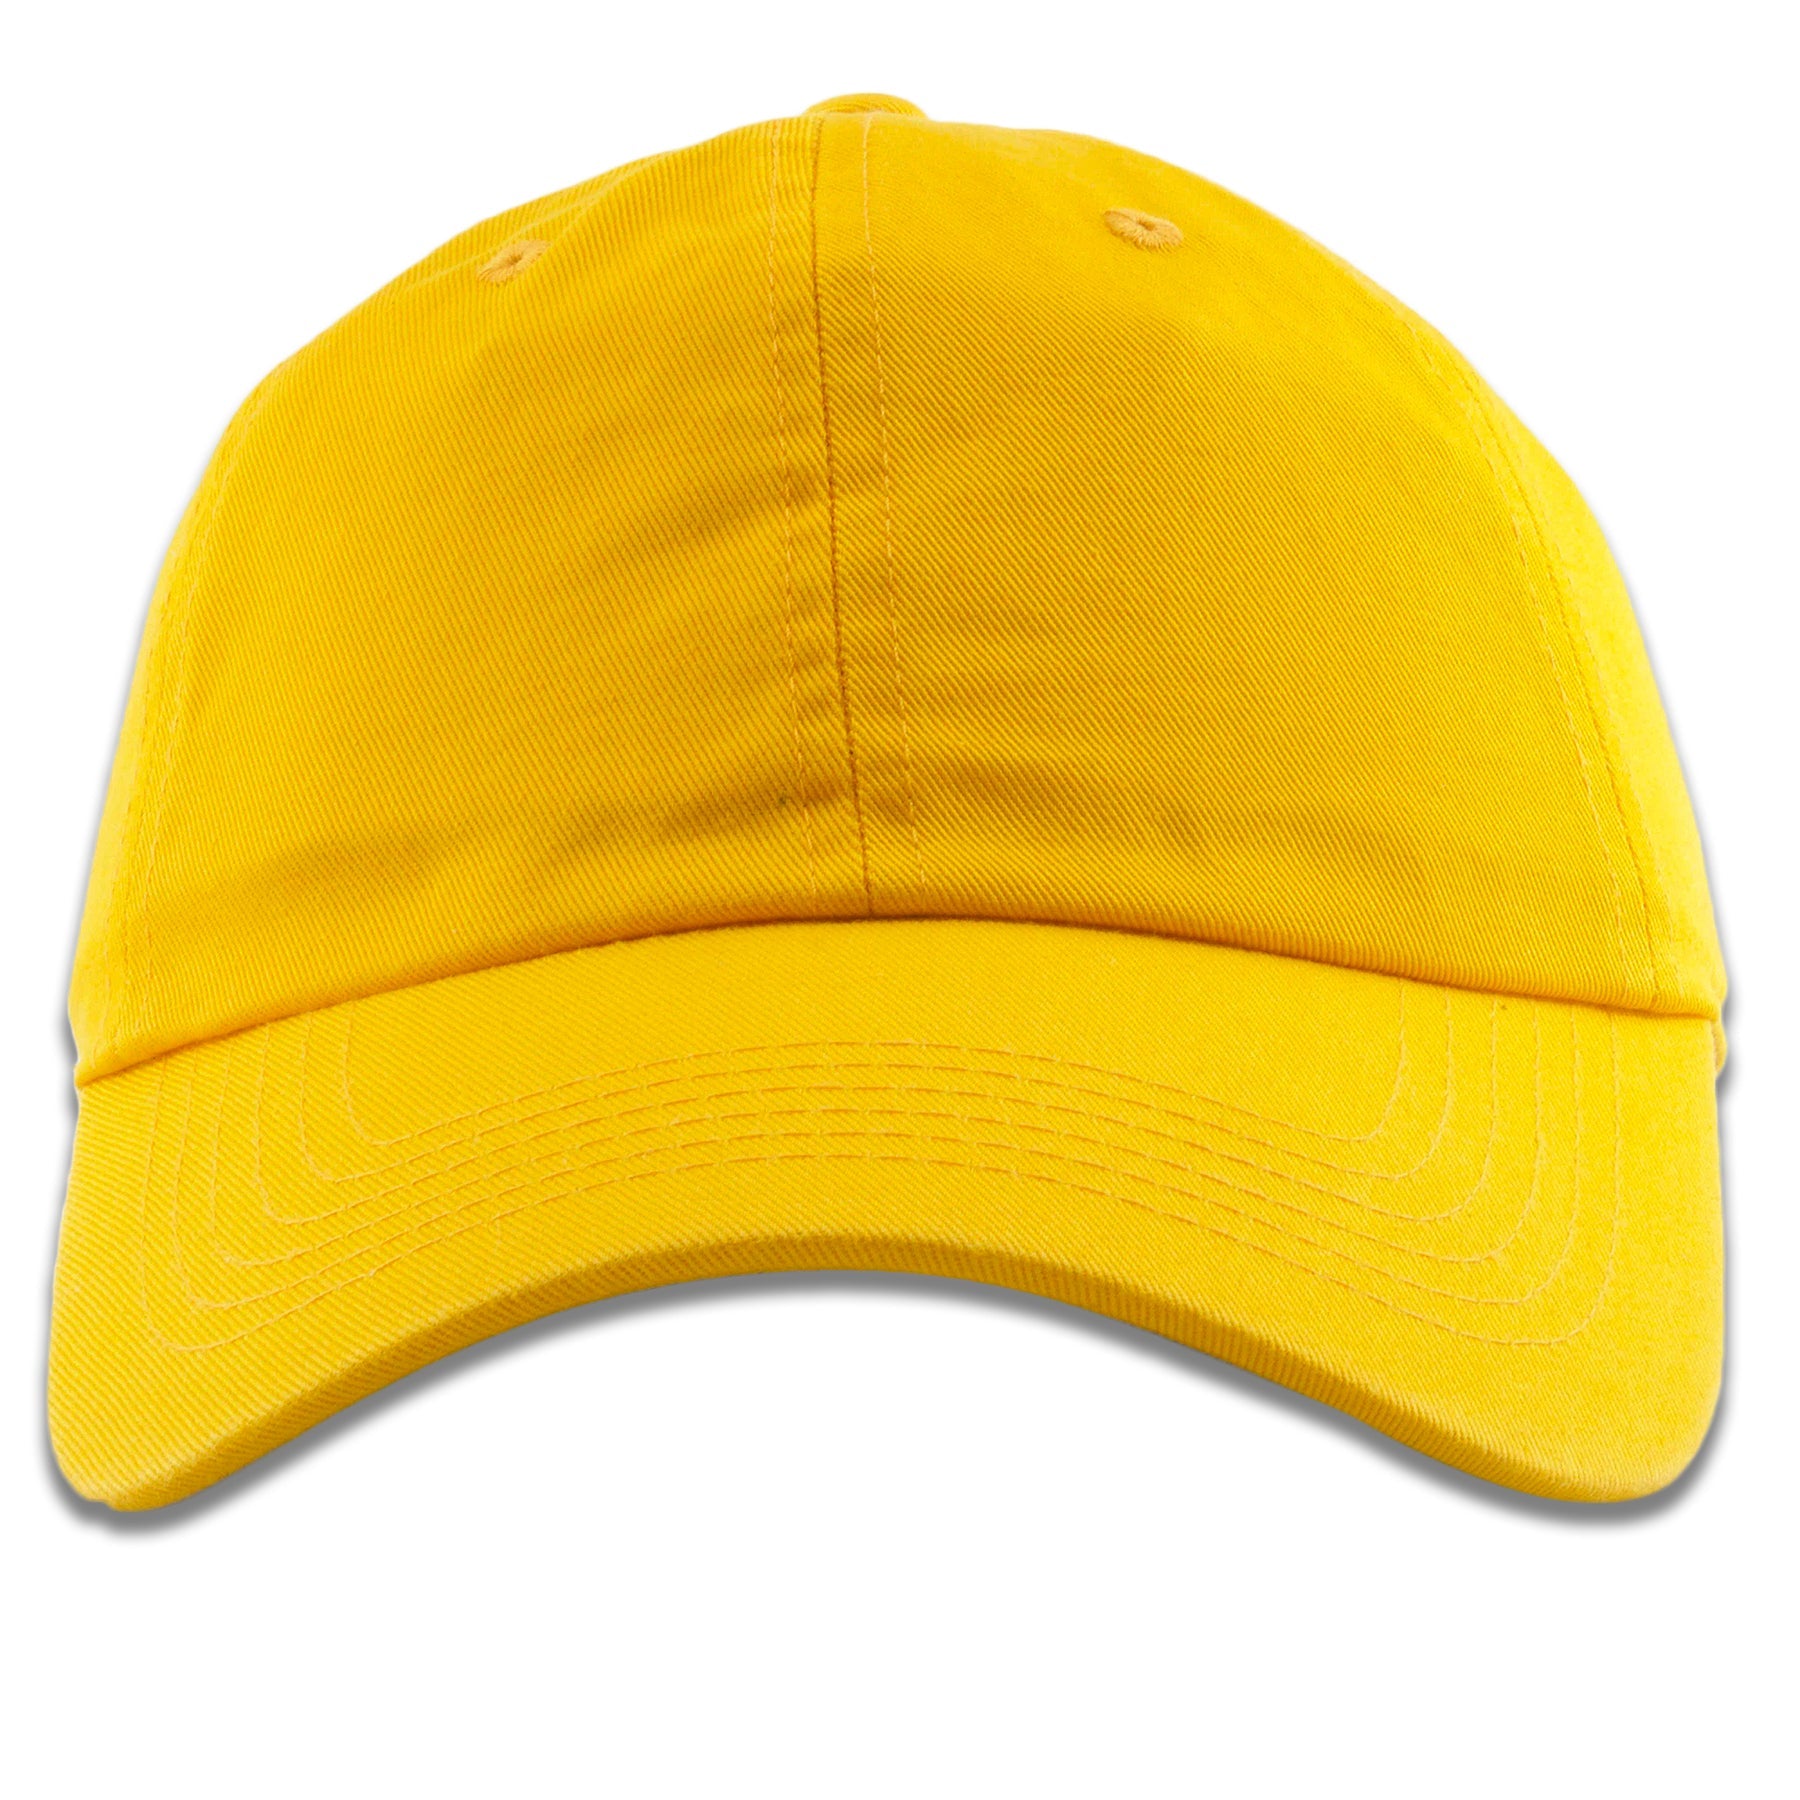 The yellow blank adjustable dad hat has a soft yellow crown and a bent brim